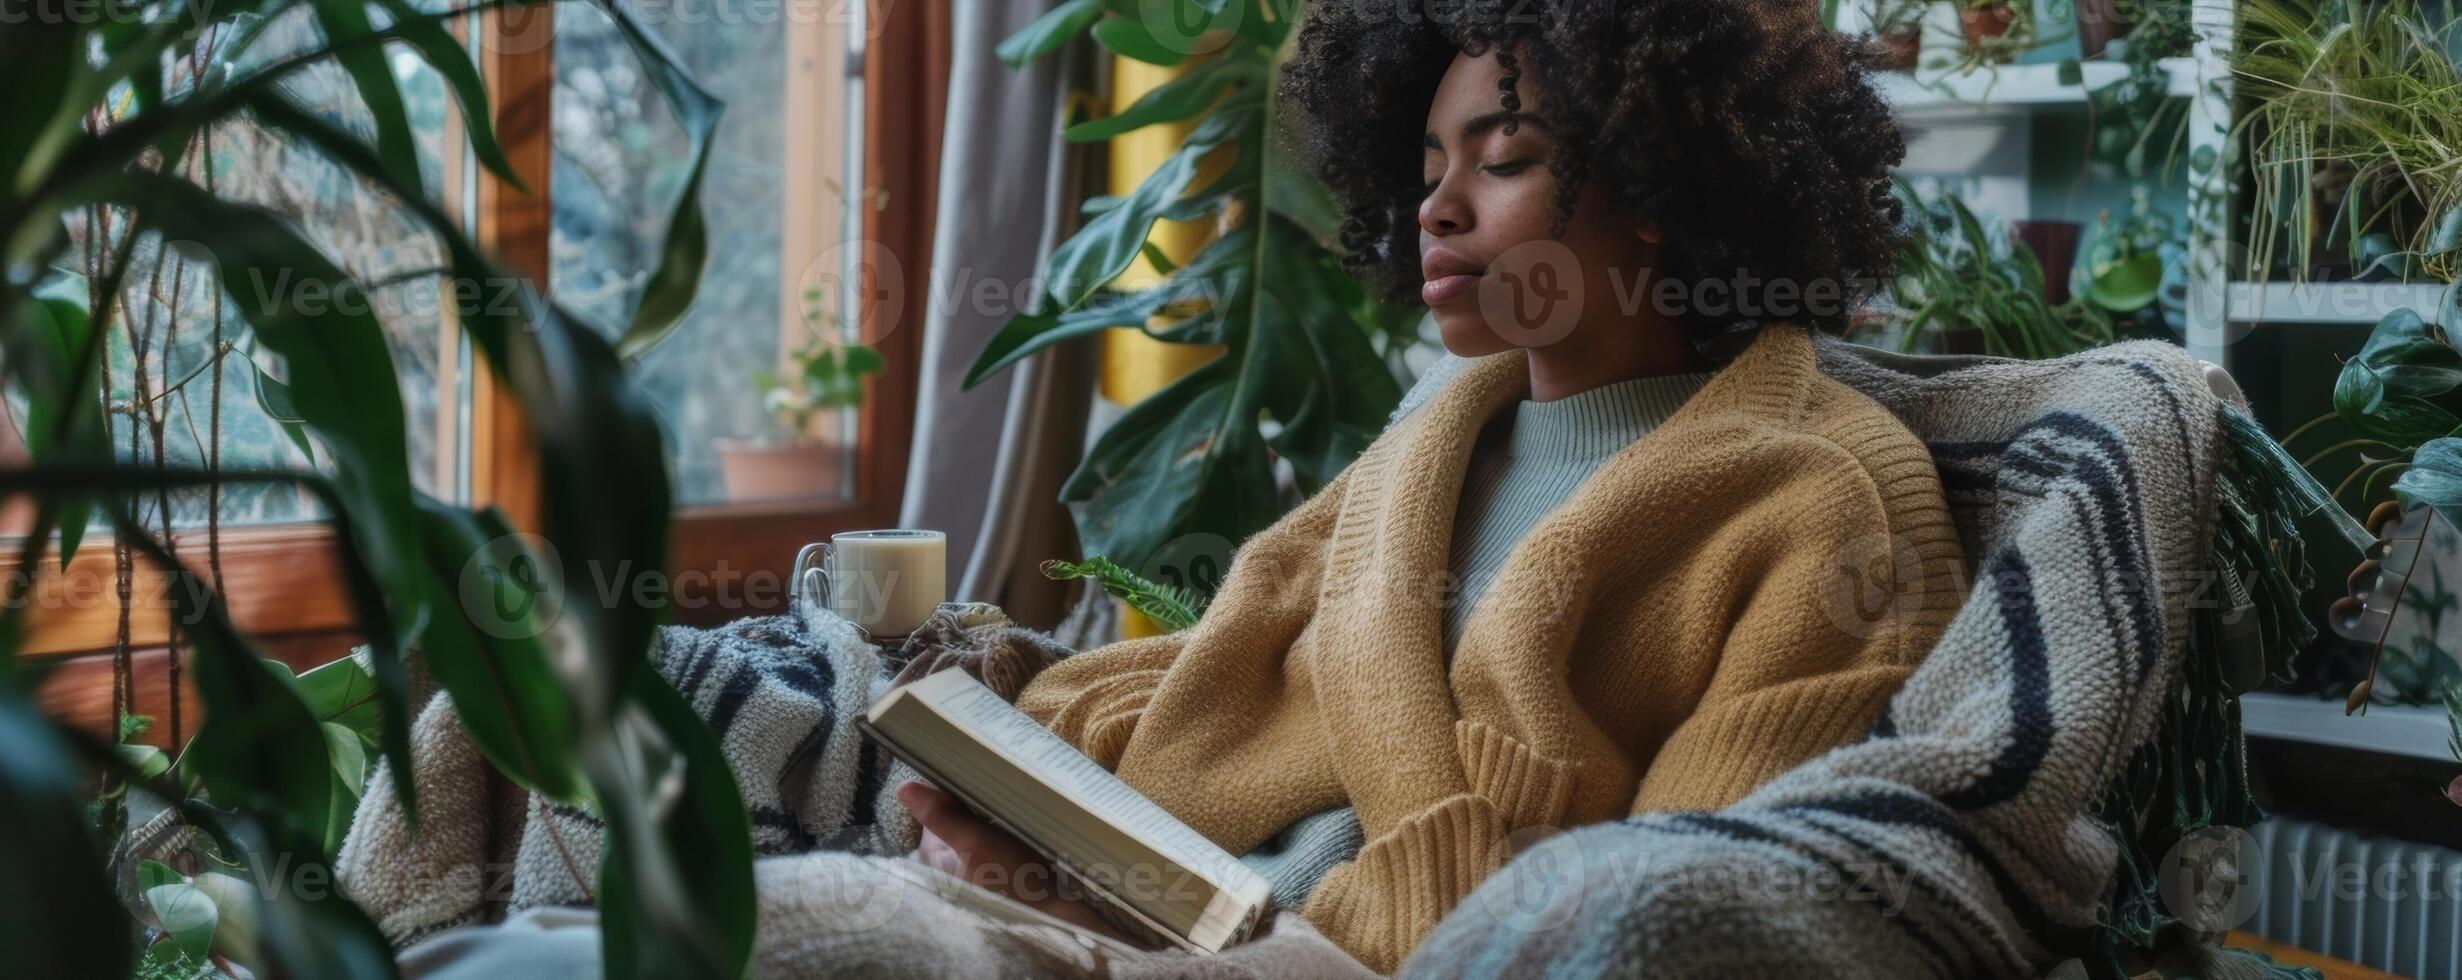 In a quiet corner of their home a person with fibromyalgia sits in a cozy sauna surrounded by plants and soft music. They sip on herbal tea and read a book while their body benefits photo